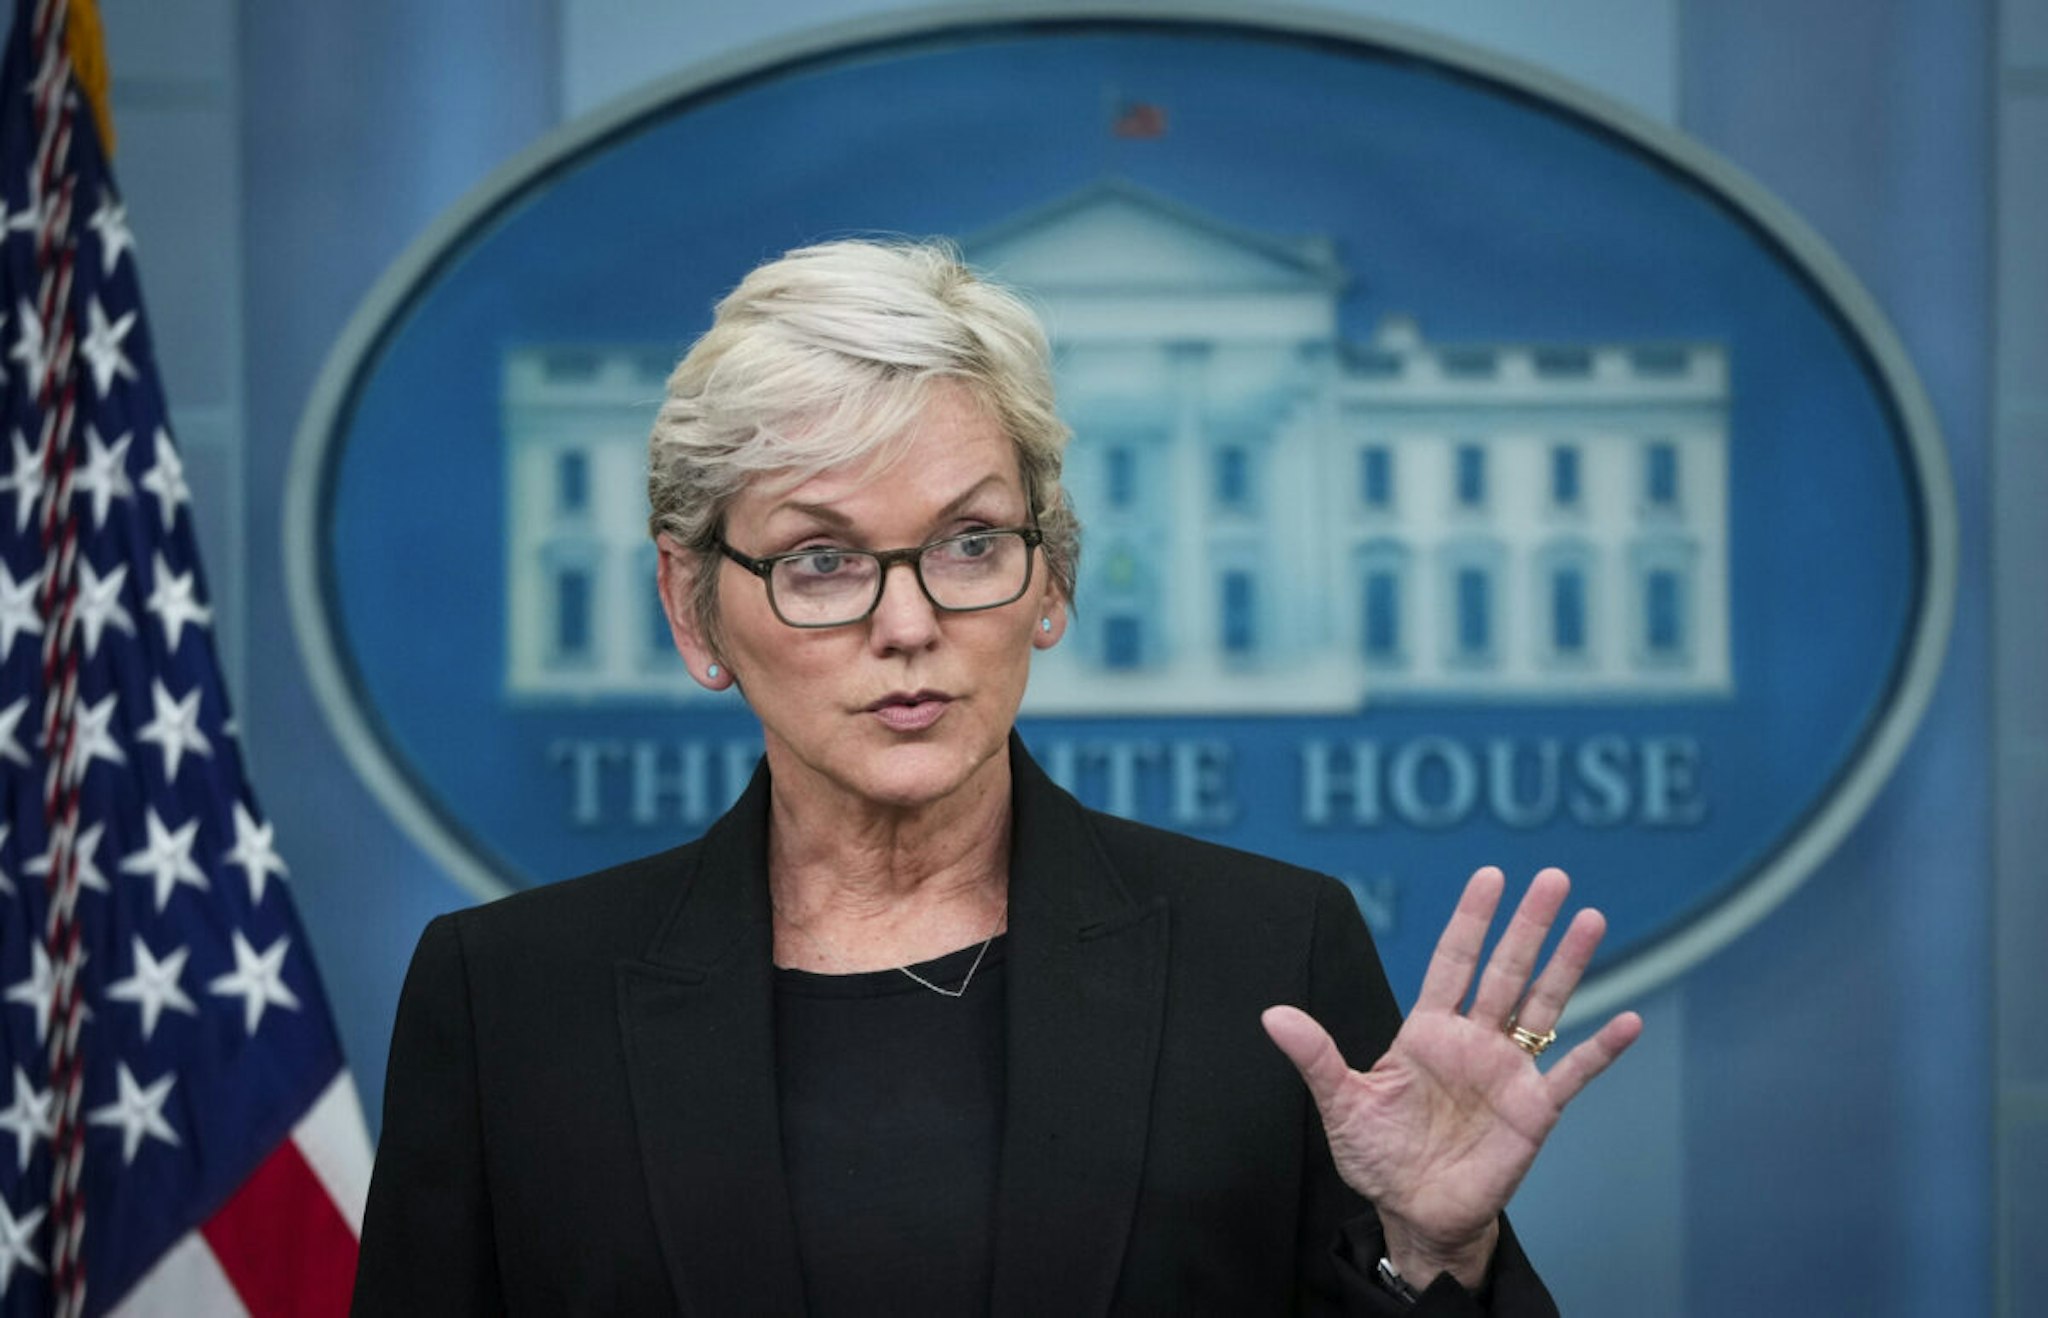 U.S. Secretary of Energy Jennifer Granholm speaks during the daily press briefing at the White House on June 22, 2022 in Washington, DC.